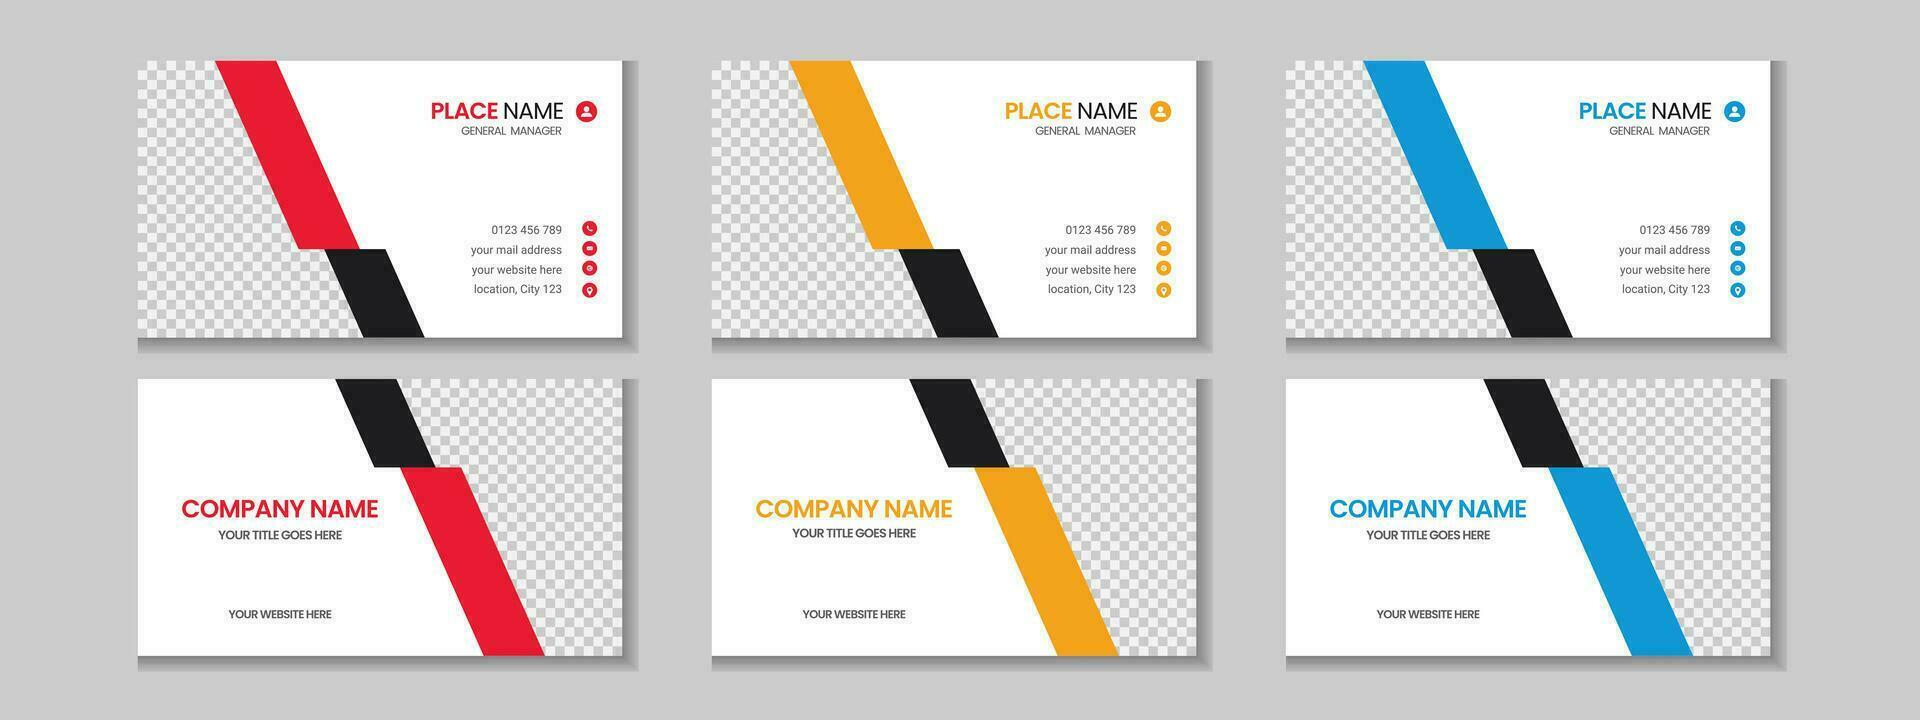 Abstract simple creative modern and clean professional business card template design with texture and pattern, elegant corporate visiting card, name card, corporate business card design with mockup vector